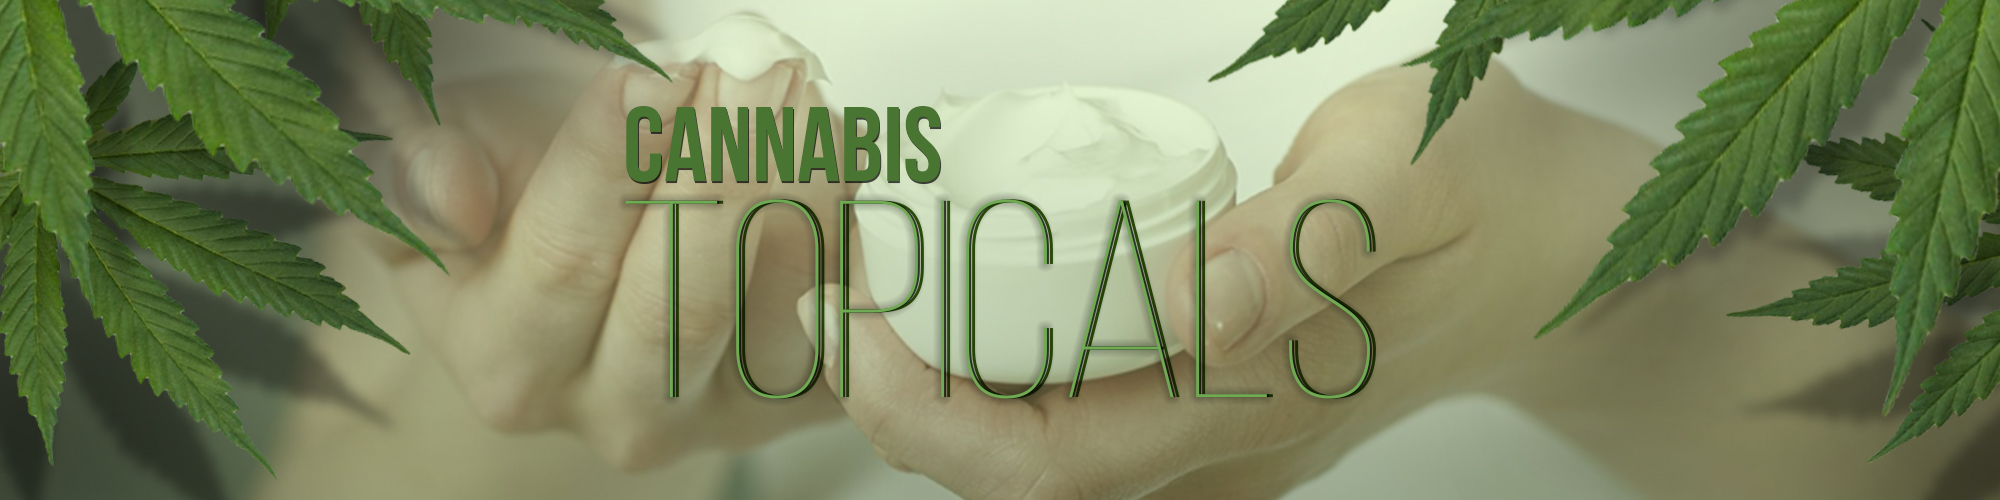 Cannabis Topicals